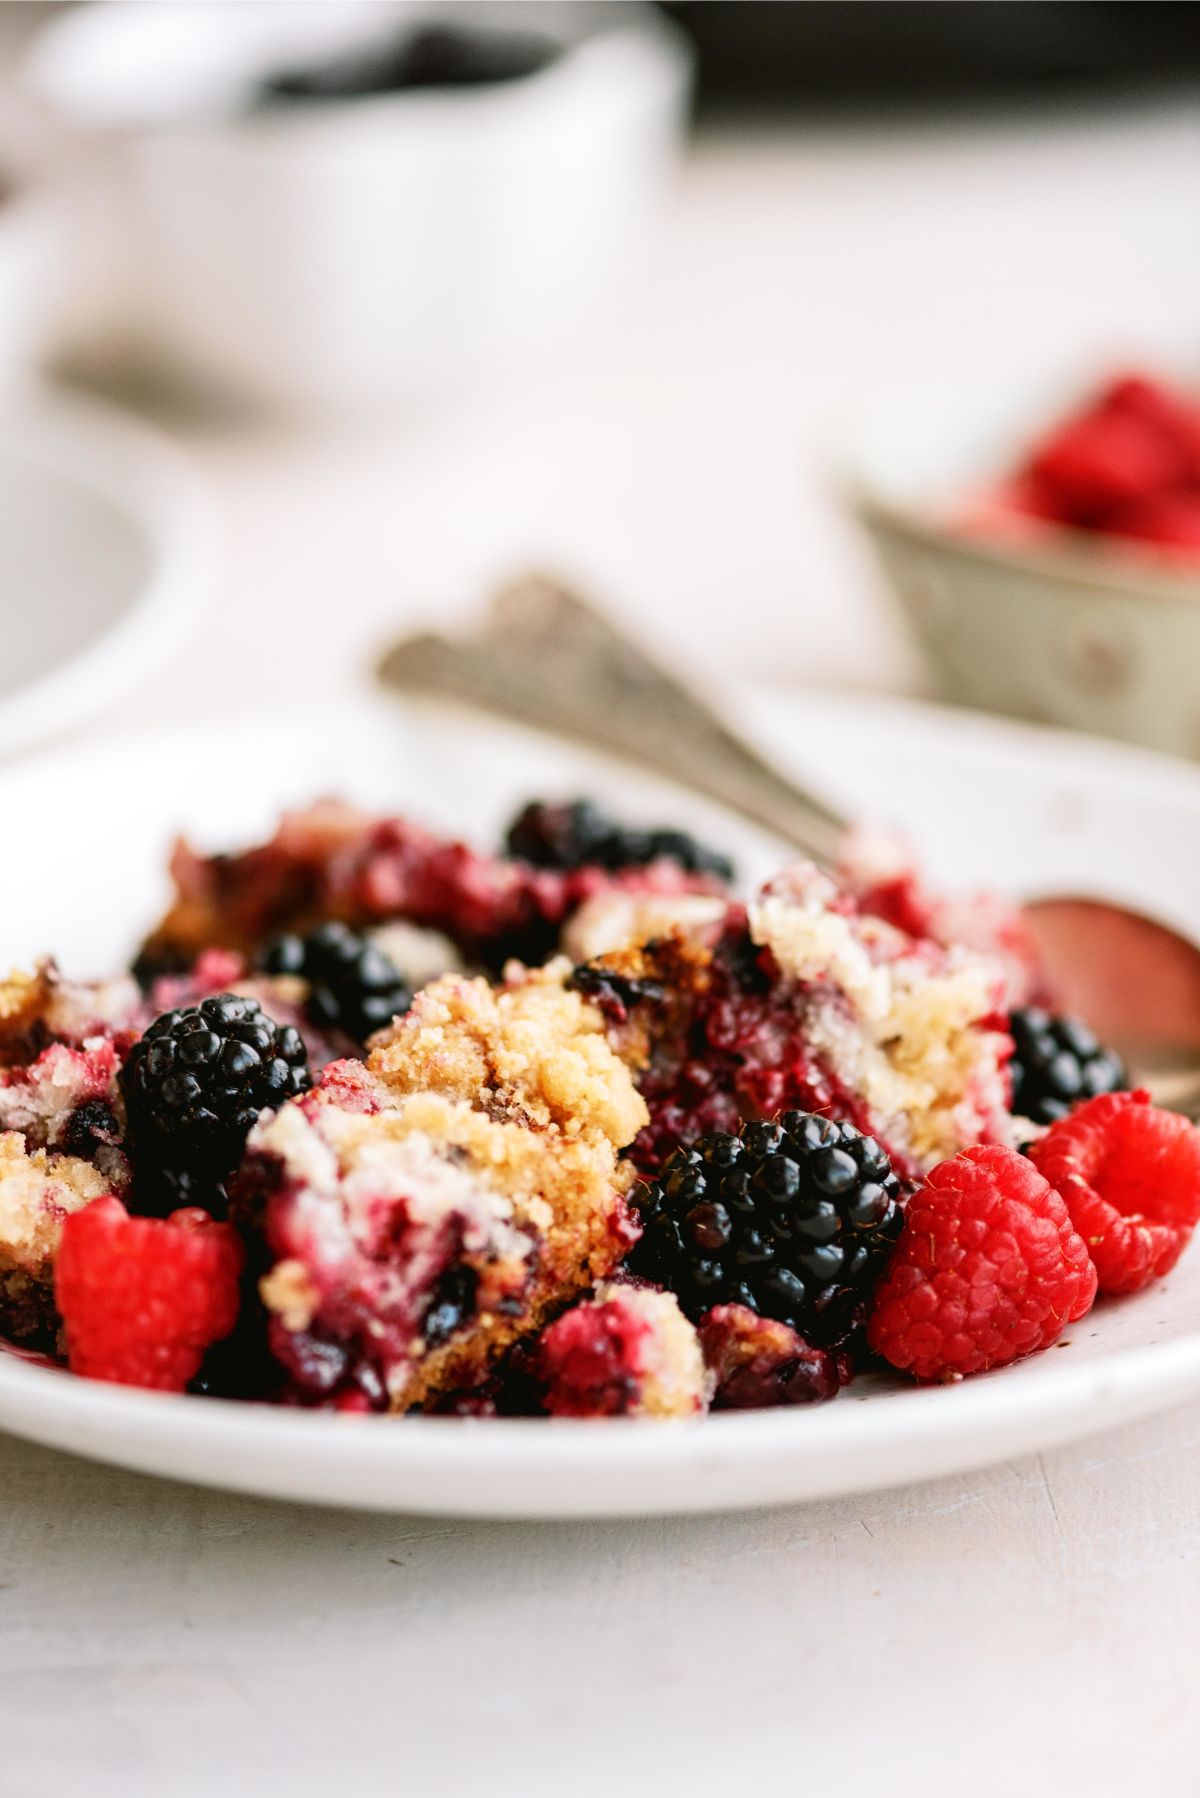 A serving of Slow Cooker Berry Cobbler on a plate